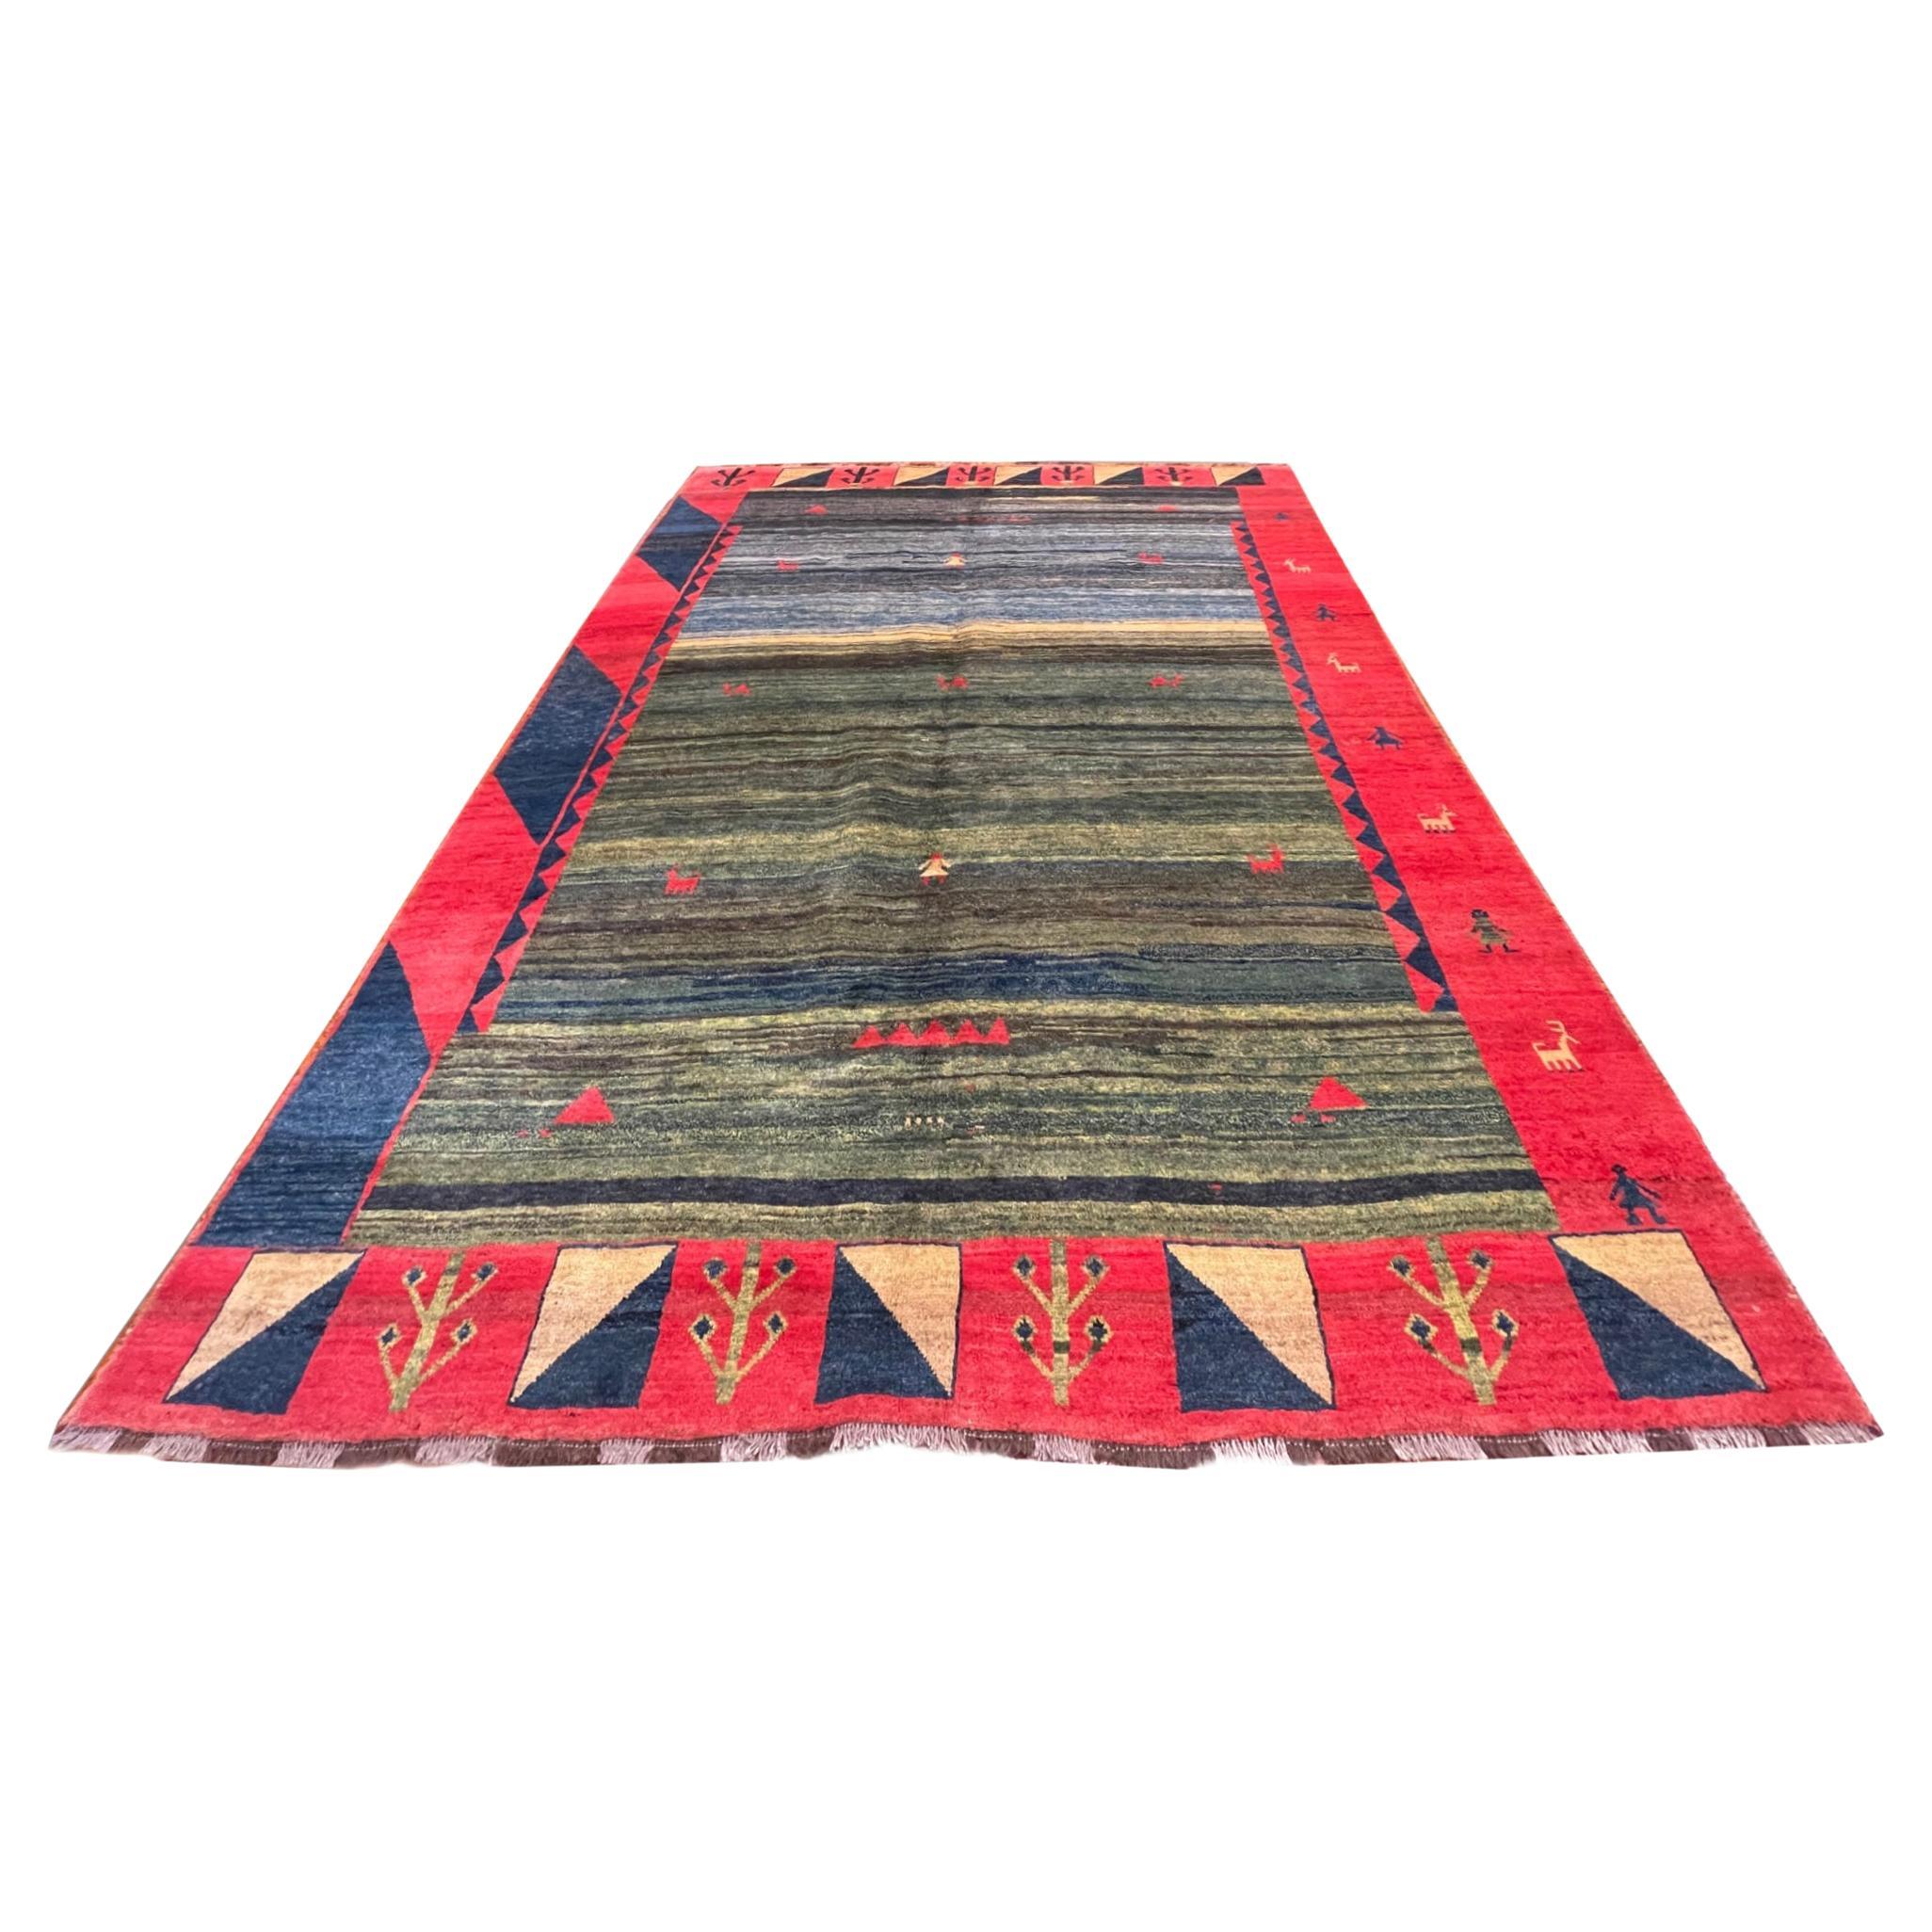  Authentic Persian Shiraz Hand Knotted Tribal Red Blue Green Gabbeh